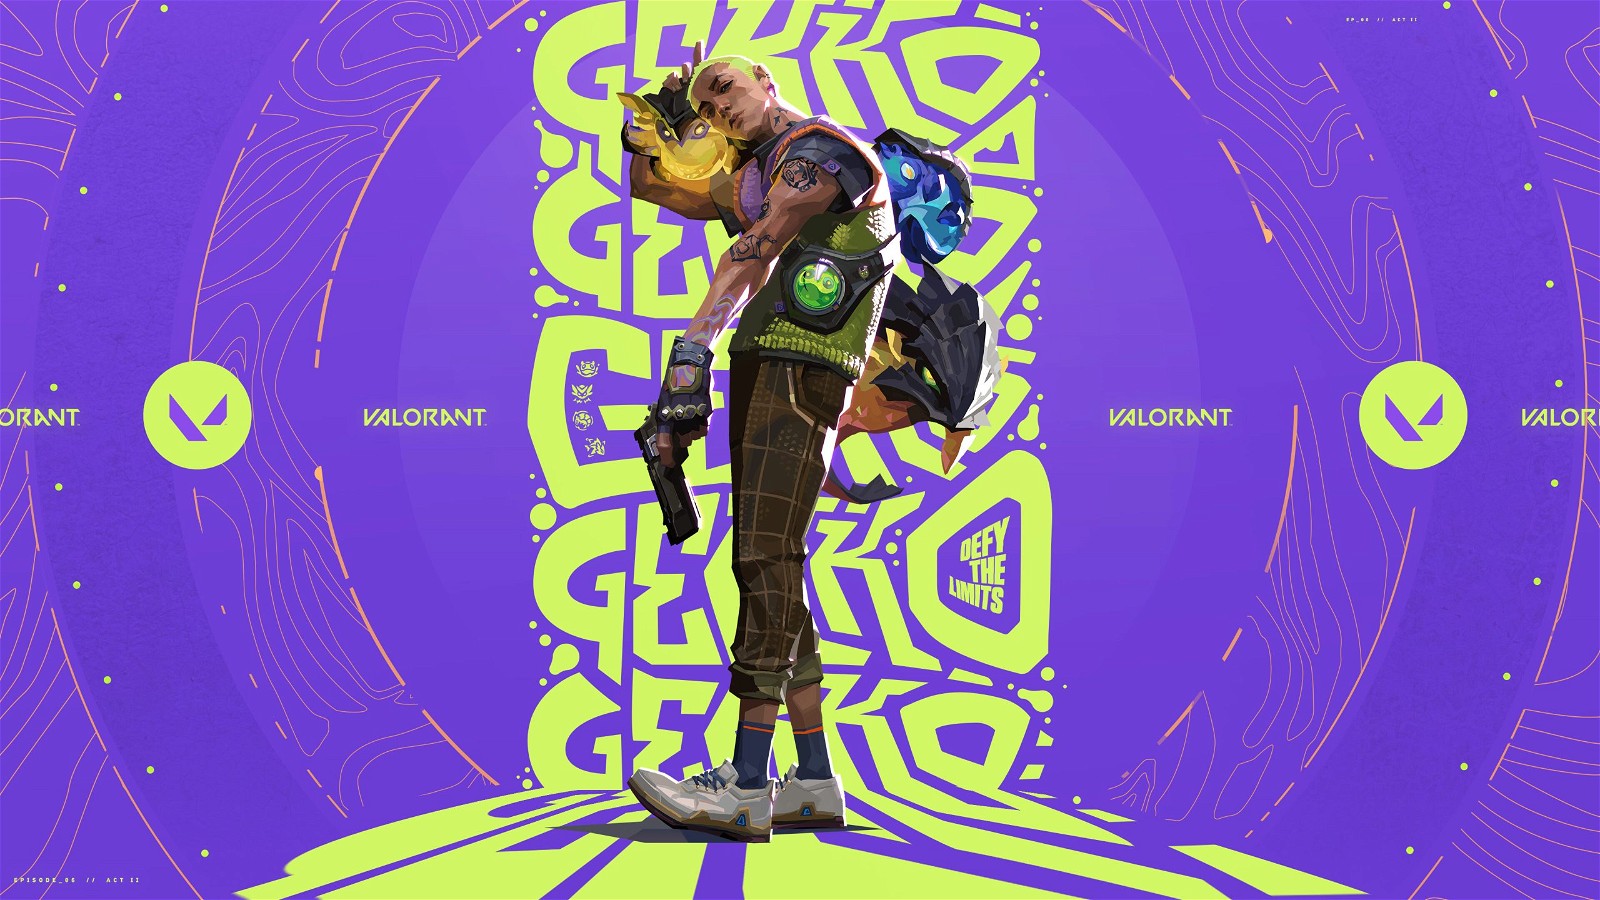 Official Art for Gekko | Image Credits: Riot Games